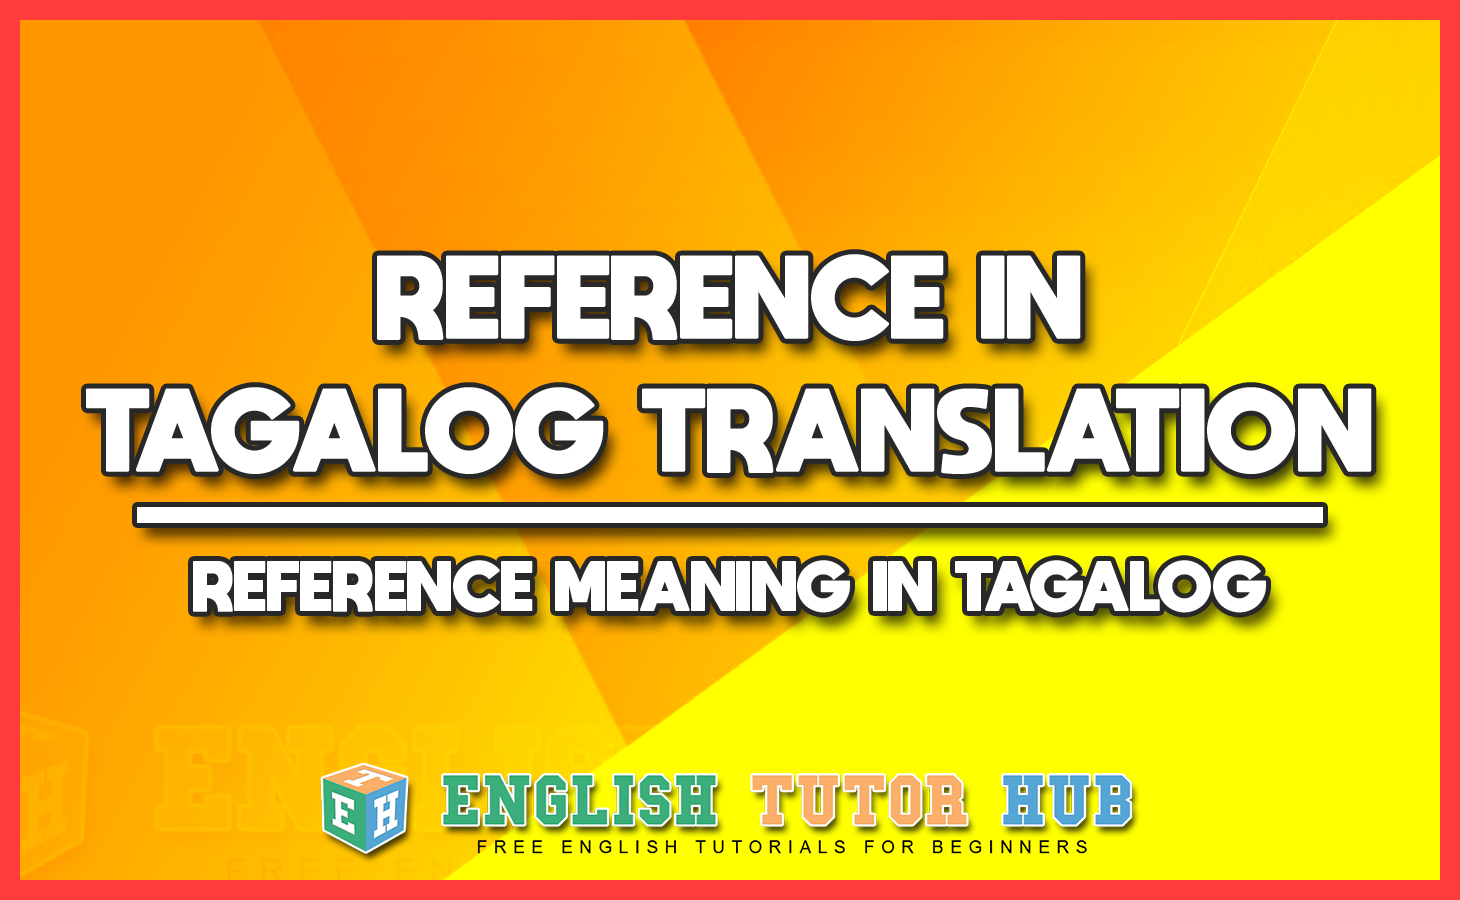 REFERENCE IN TAGALOG TRANSLATION - REFERENCE MEANING IN TAGALOG